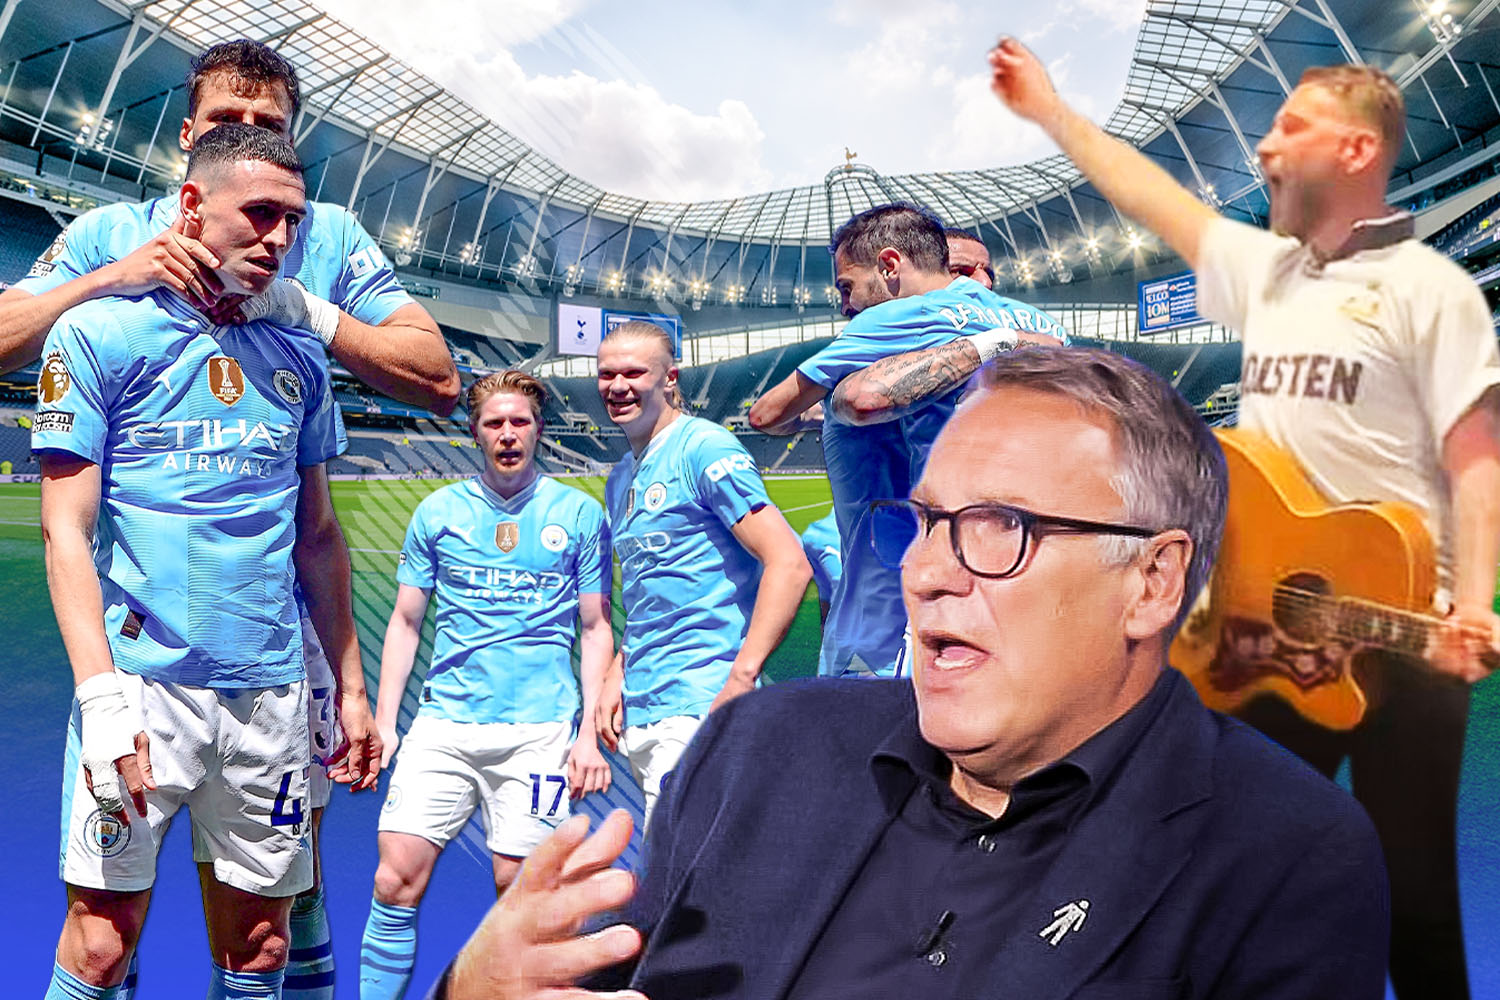 Merson in bold claim as Spurs fans make pro-Man City chant against own team